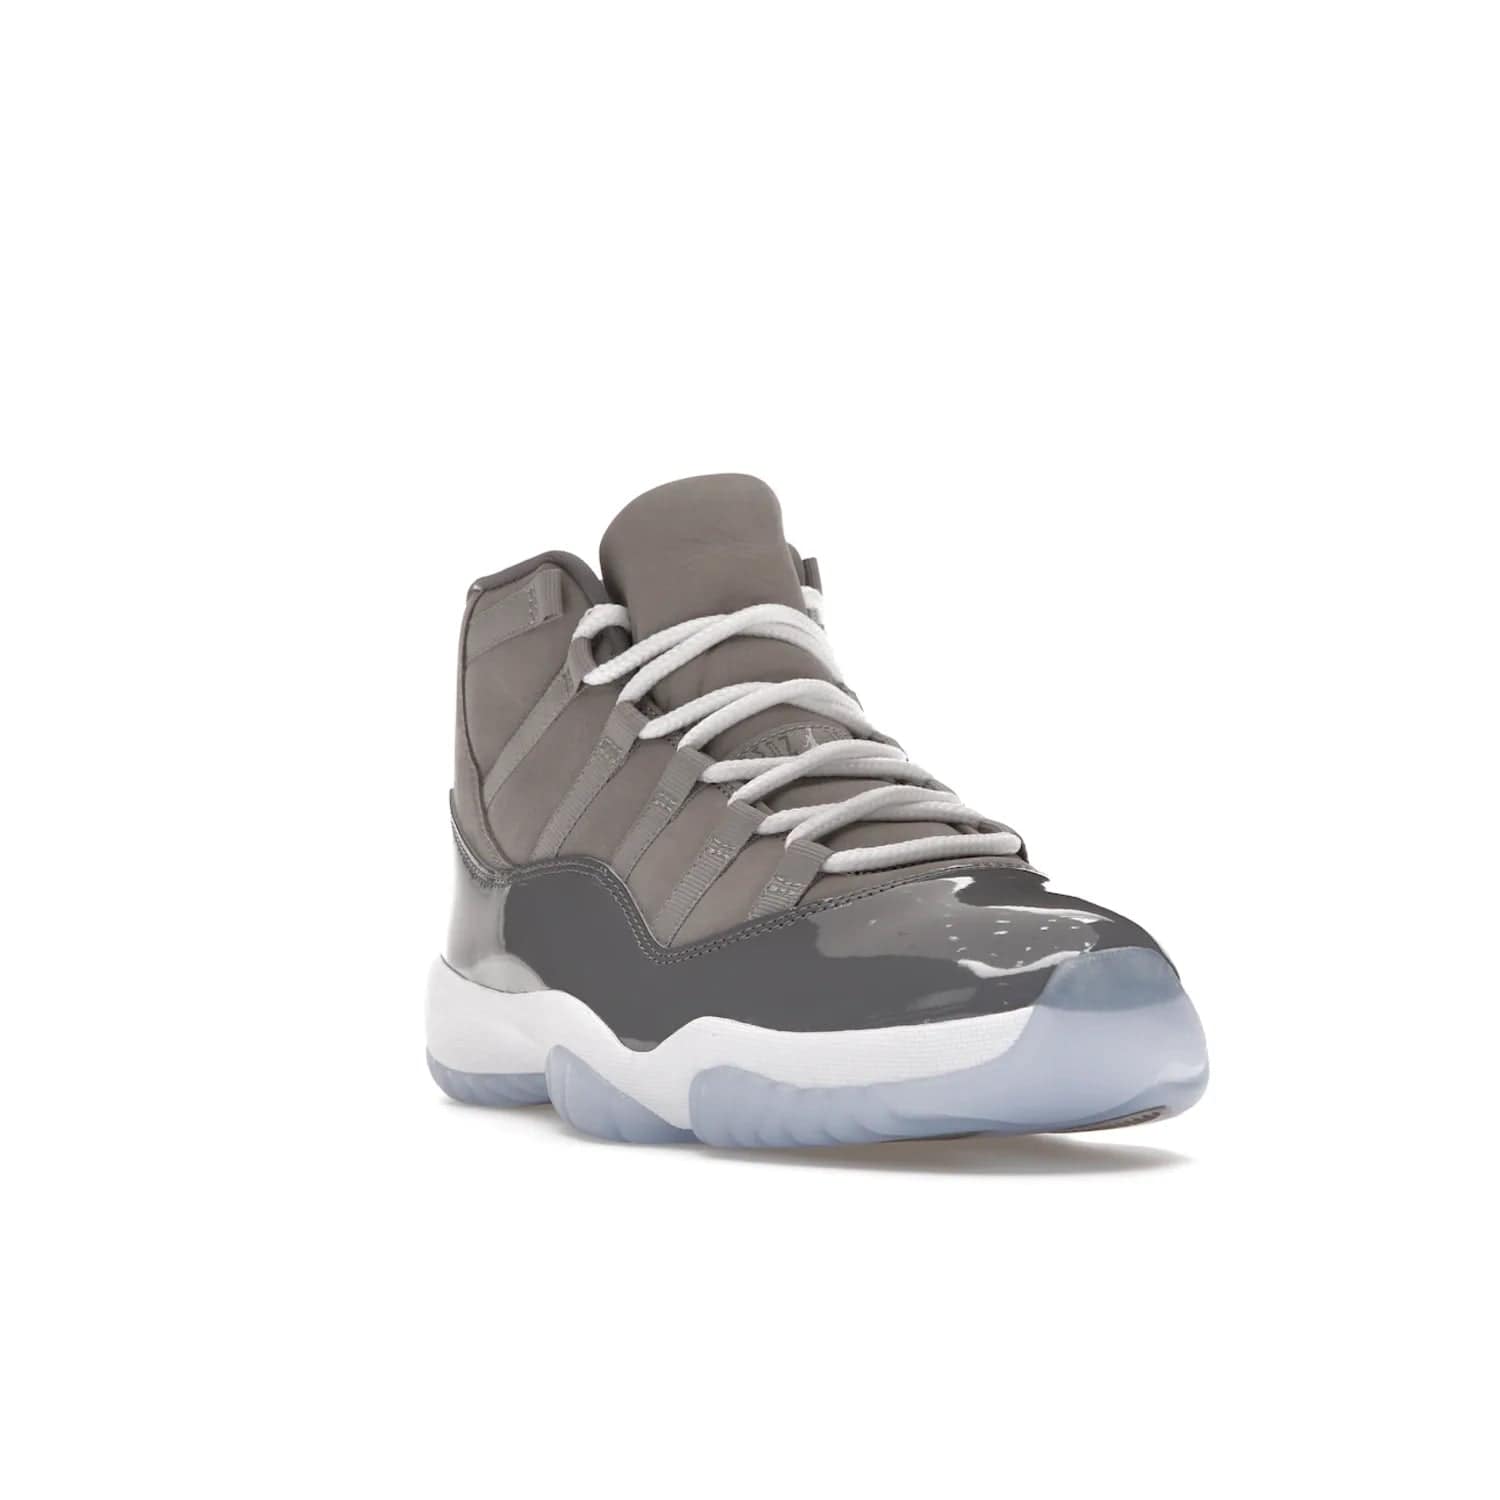 Jordan 11 Retro Cool Grey (2021) - Image 7 - Only at www.BallersClubKickz.com - Shop the Air Jordan 11 Retro Cool Grey (2021) for a must-have sneaker with a Cool Grey Durabuck upper, patent leather overlays, signature Jumpman embroidery, a white midsole, icy blue translucent outsole, and Multi-Color accents.  Released in December 2021 for $225.